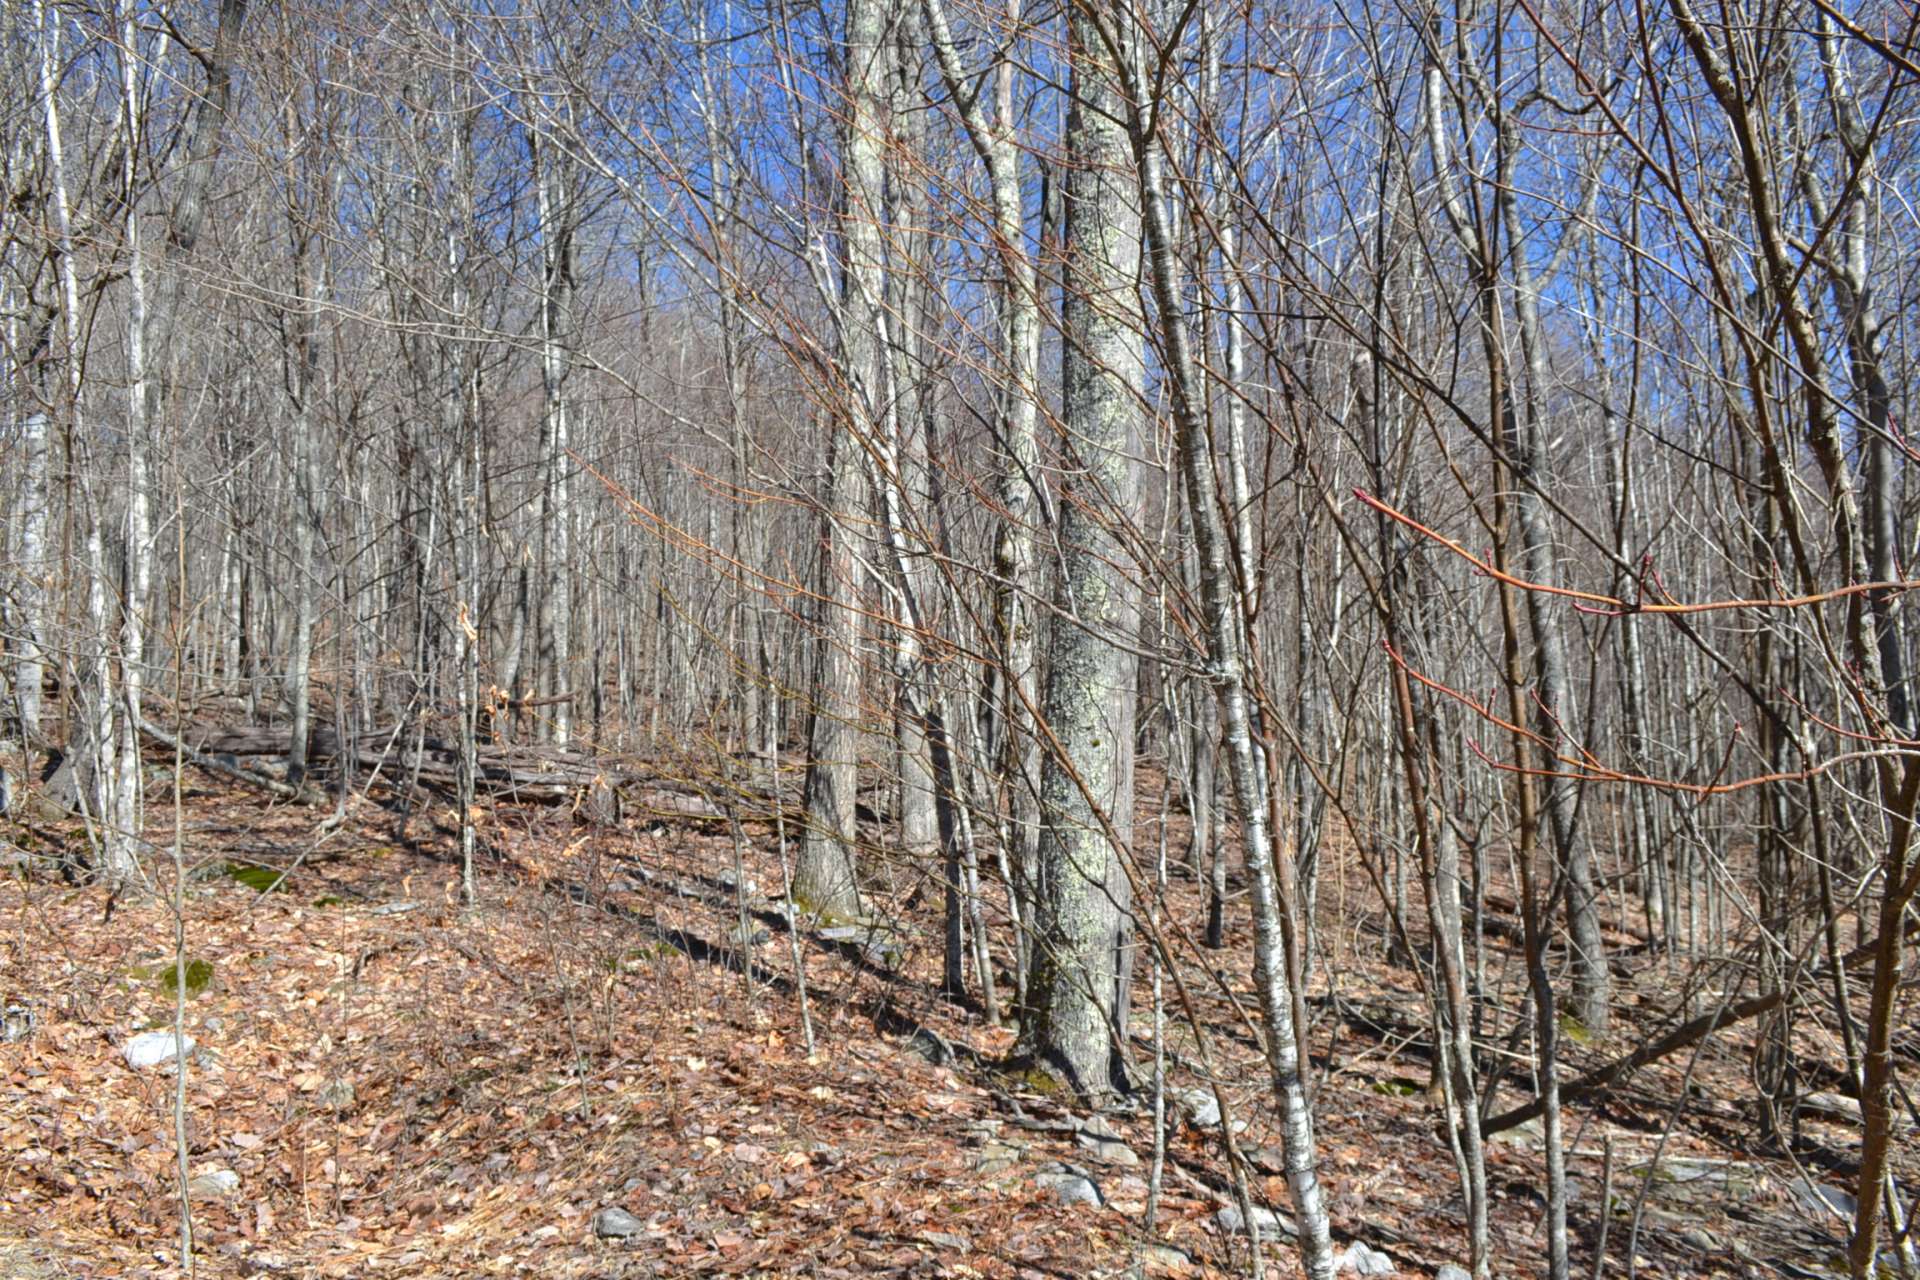 Lot 21 borders the Jefferson National Forest and is a 5.46 acre home site priced at $65,000. SOLD